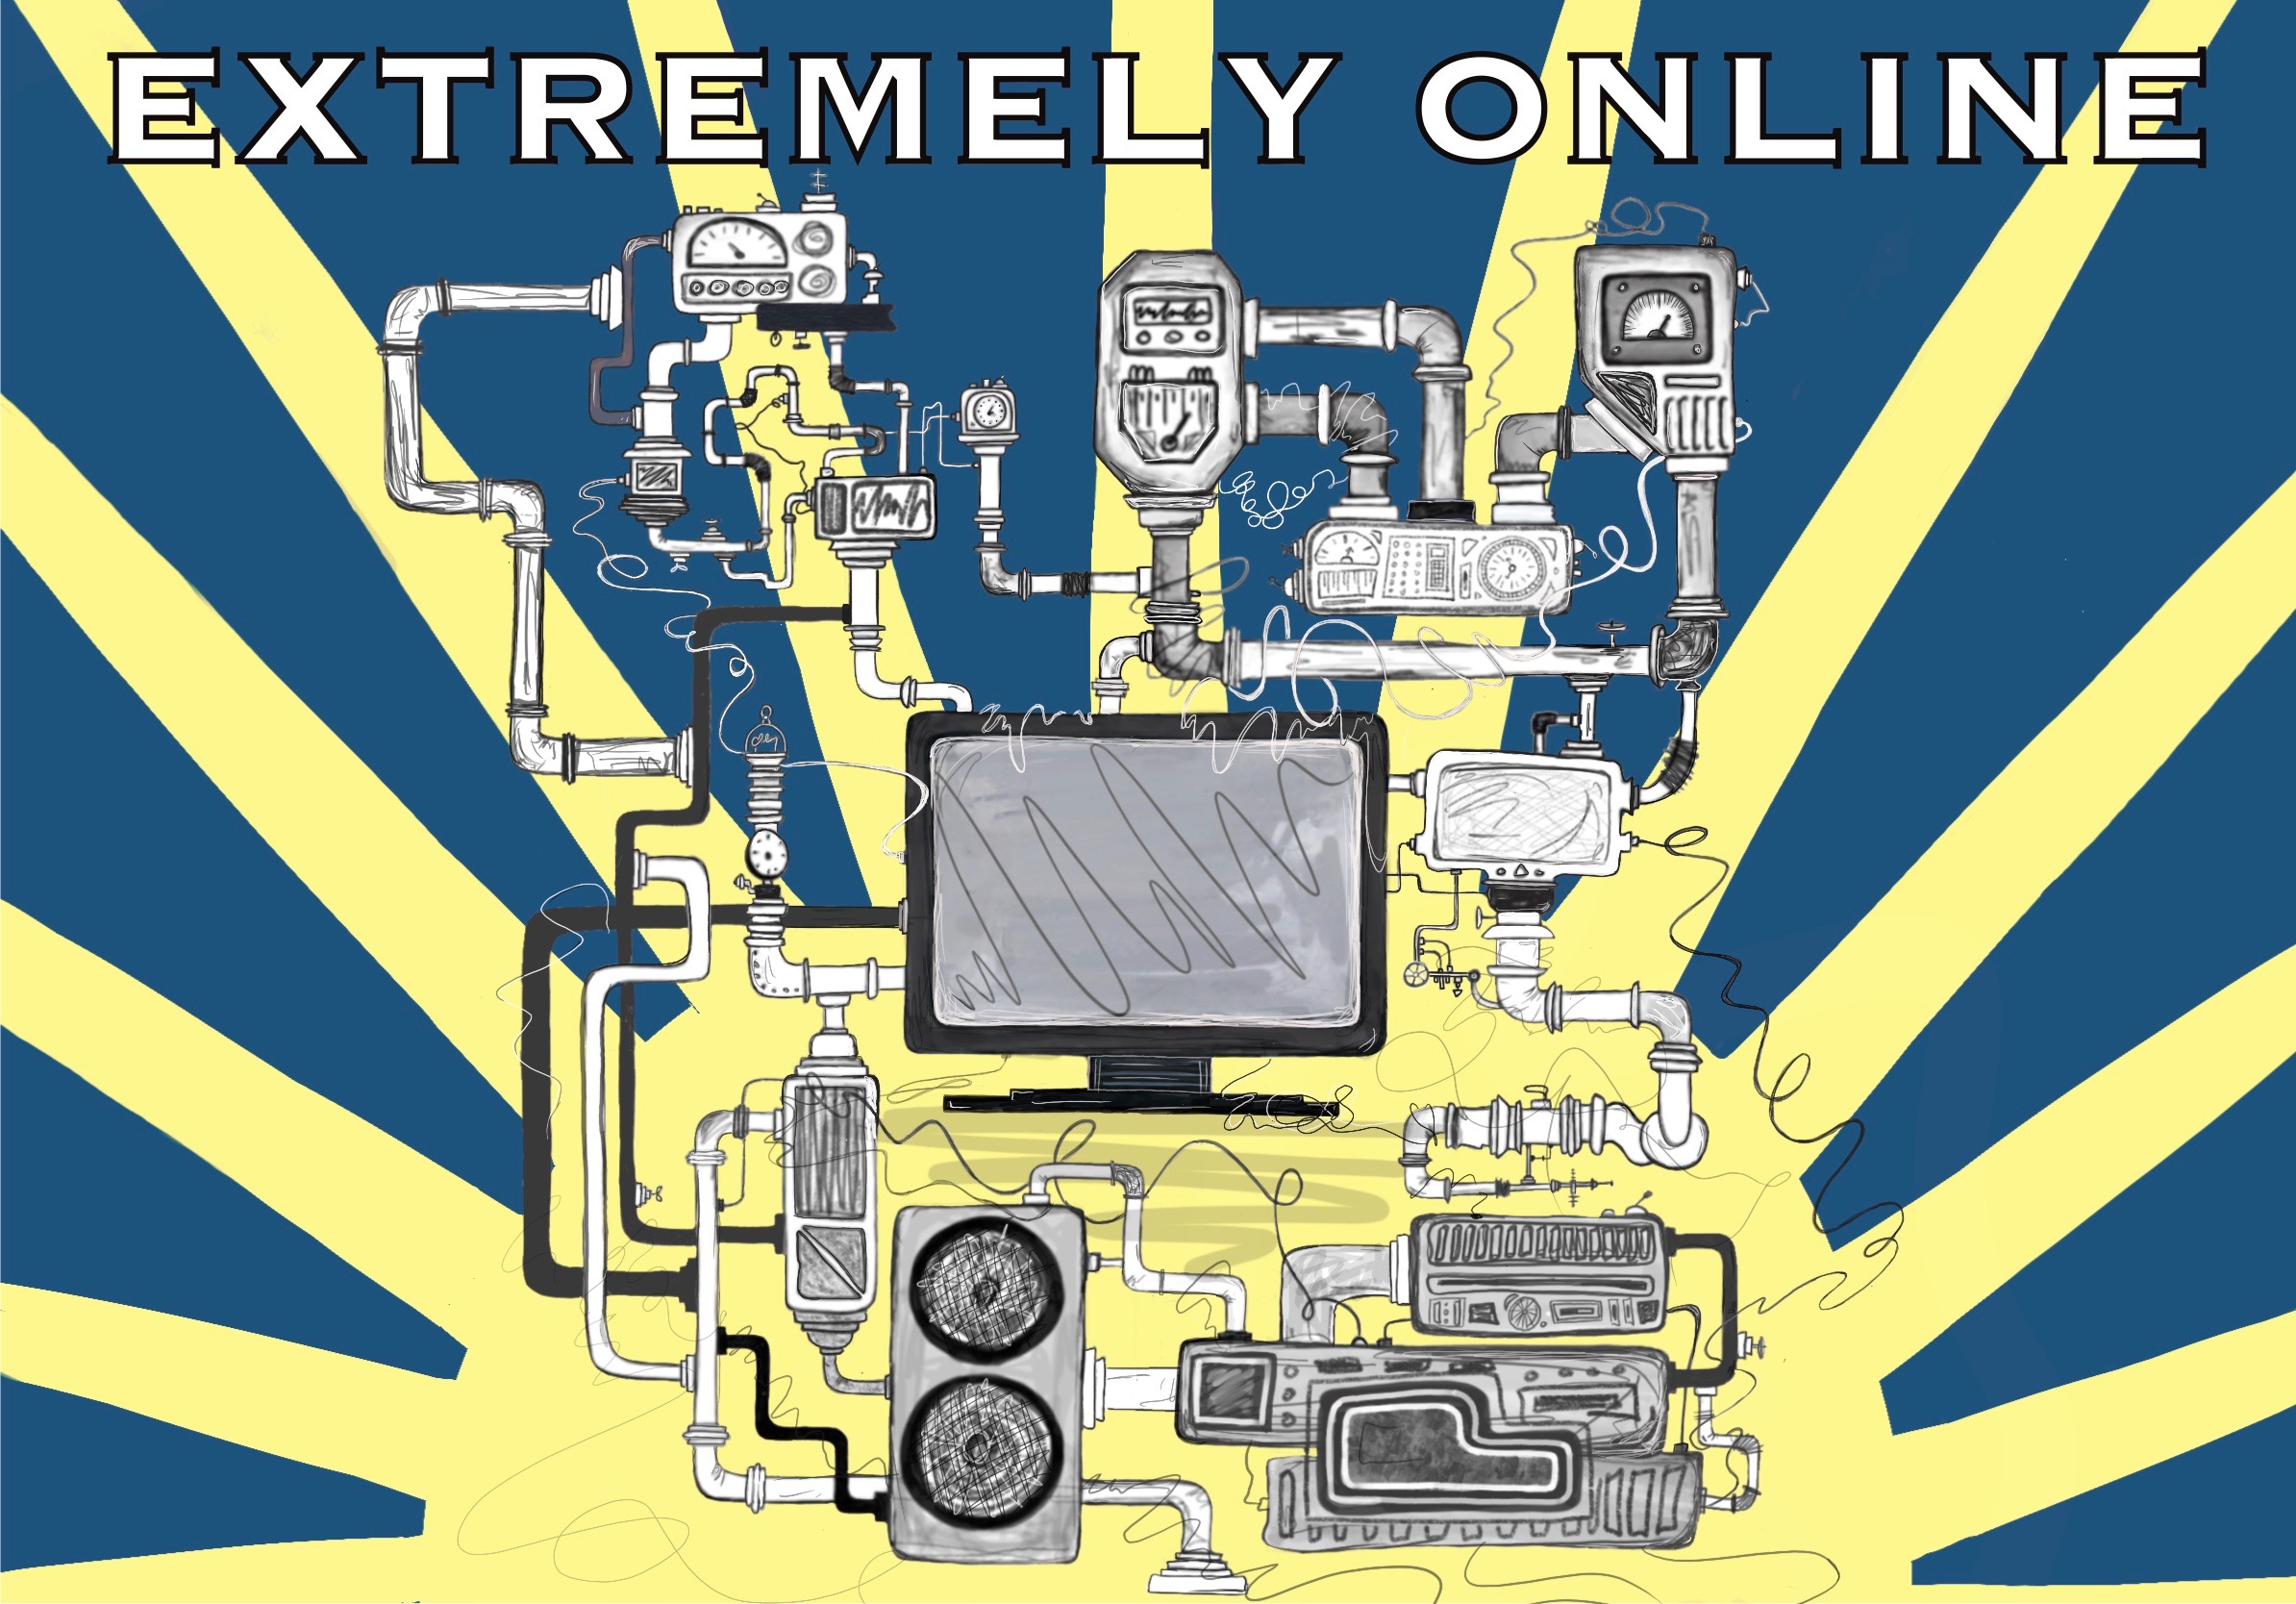 Graphic design of yellow sun on top of a blue background with a grey computer and many wires and tubes connected to it in the foreground.